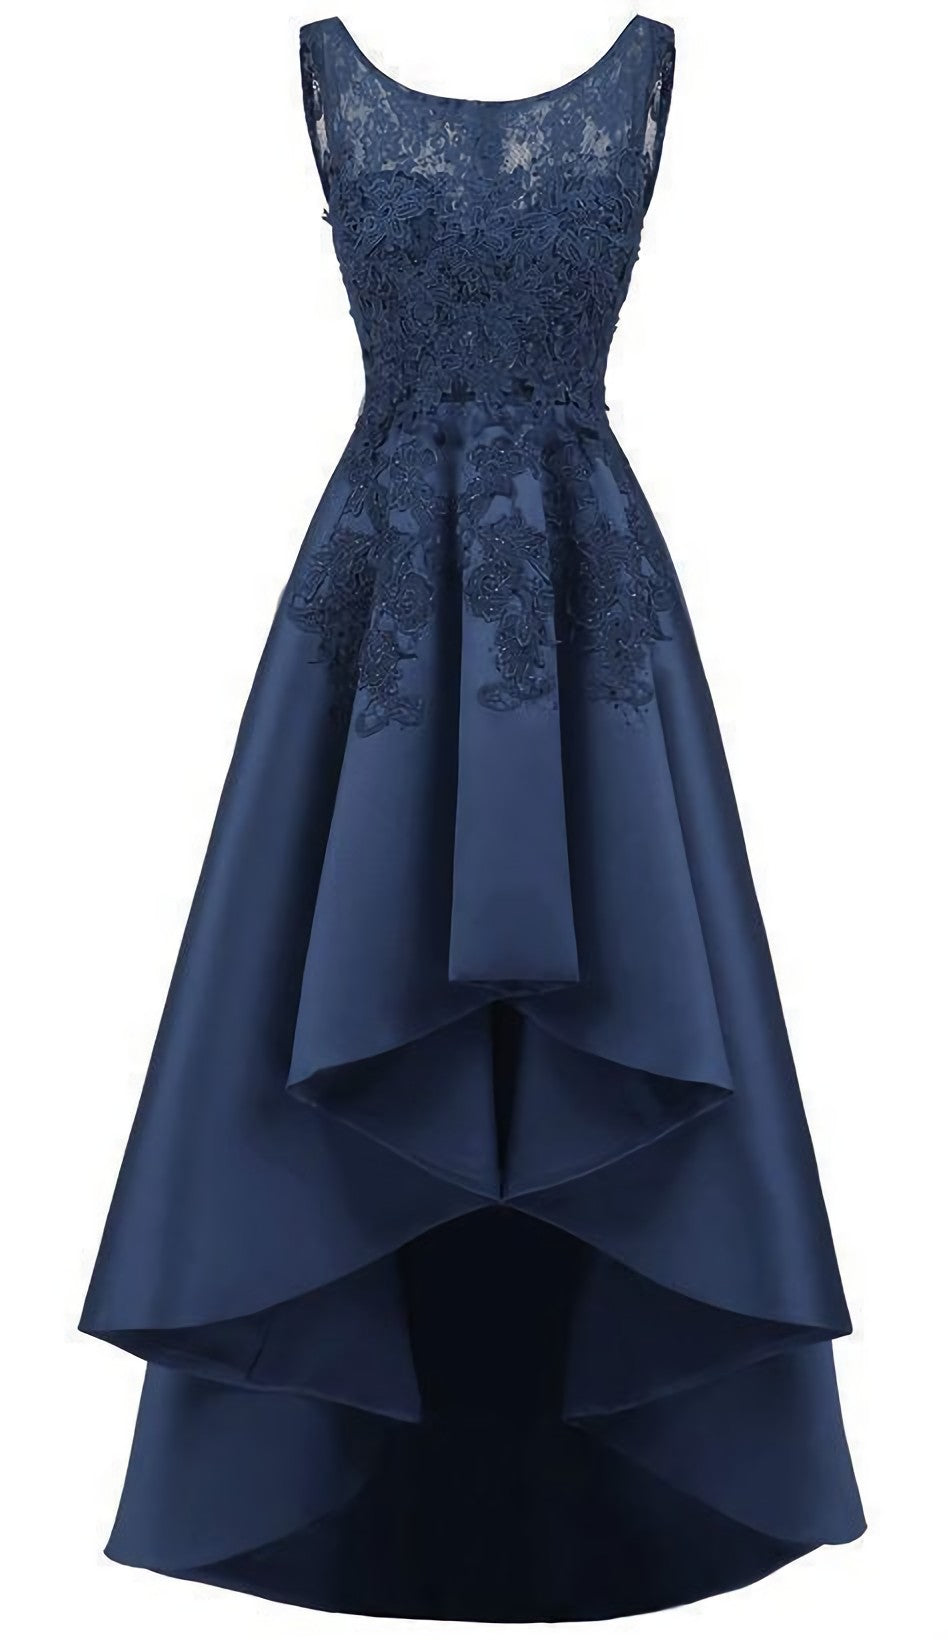 Wedding Dresses Designs, New Arrive Long Formal Prom Dress, Navy Blue Lace Beaded Wedding Party Dresses, High Low Bridesmaid Gowns Formal